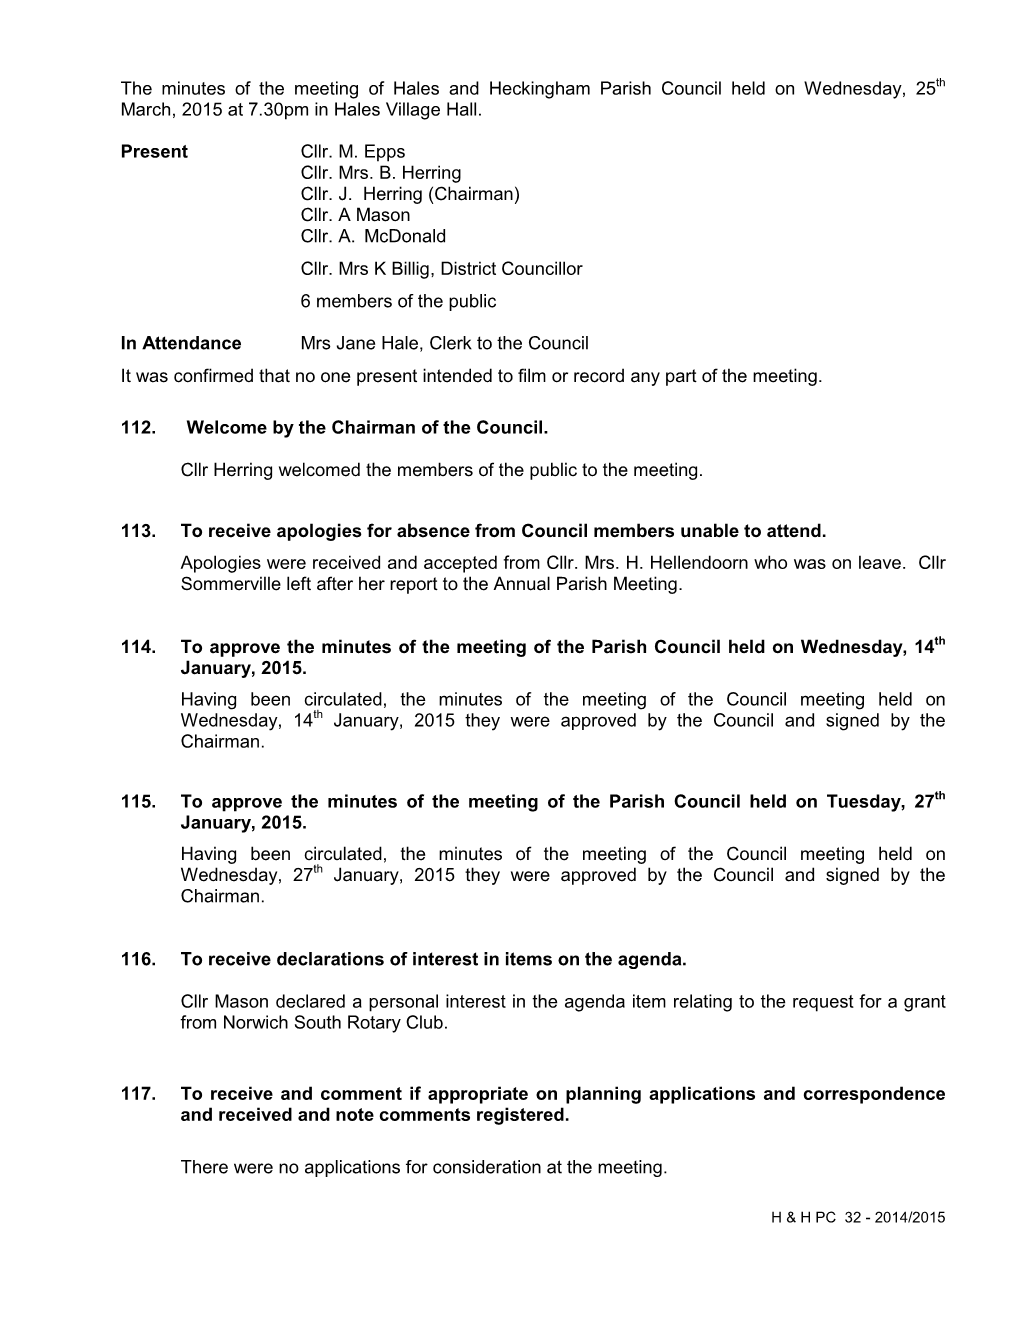 The Minutes of the Meeting of Hales and Heckingham Parish Council Held on Wednesday, 25Th March, 2015 at 7.30Pm in Hales Village Hall